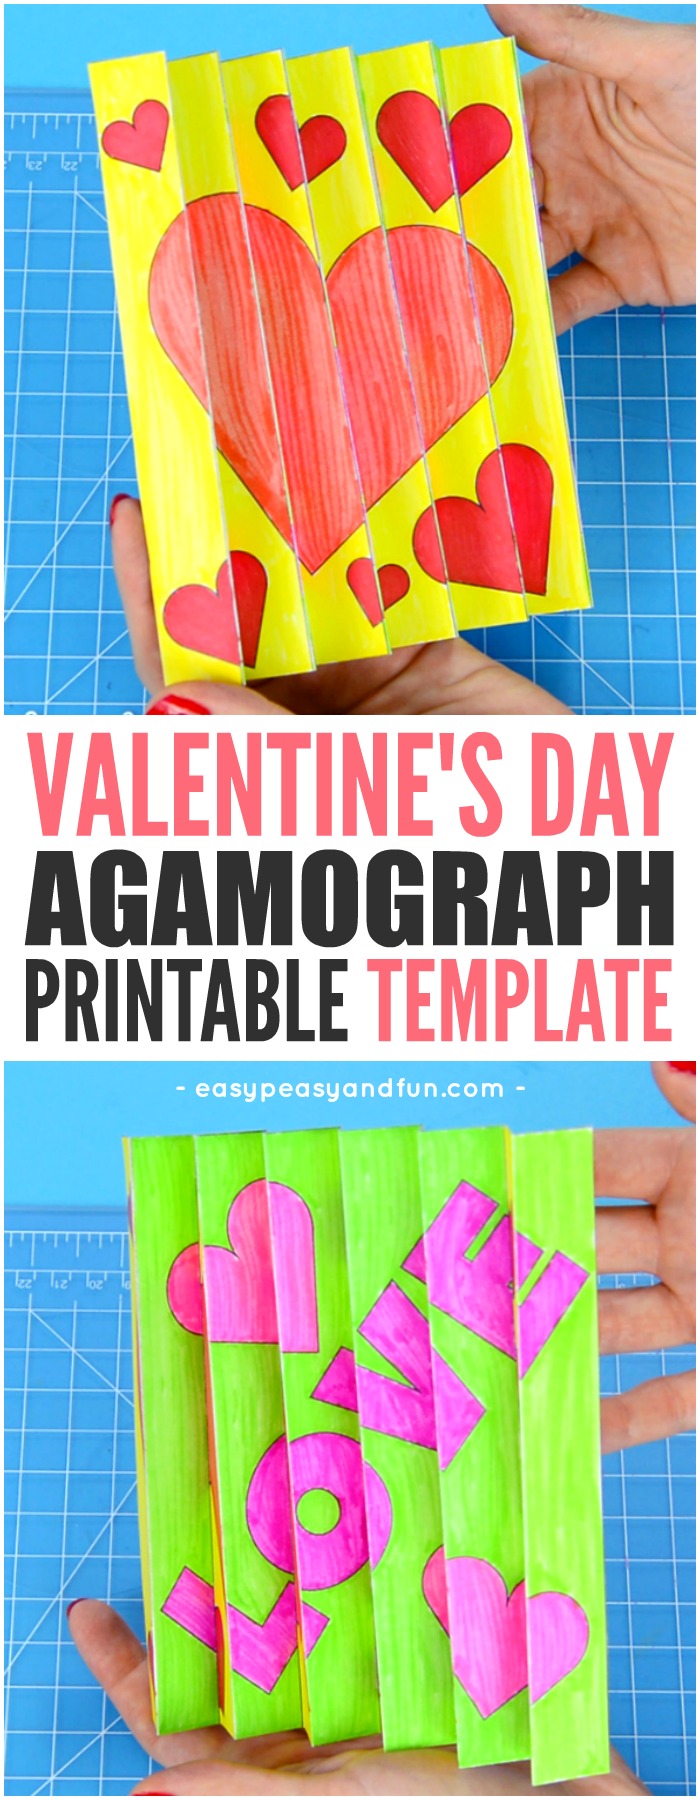 Printable Valentine's Day Agamograph Template Craft for Kids to Make #Valentine'sdaycraftforkids #craftsforkids #craftswithtemplate 